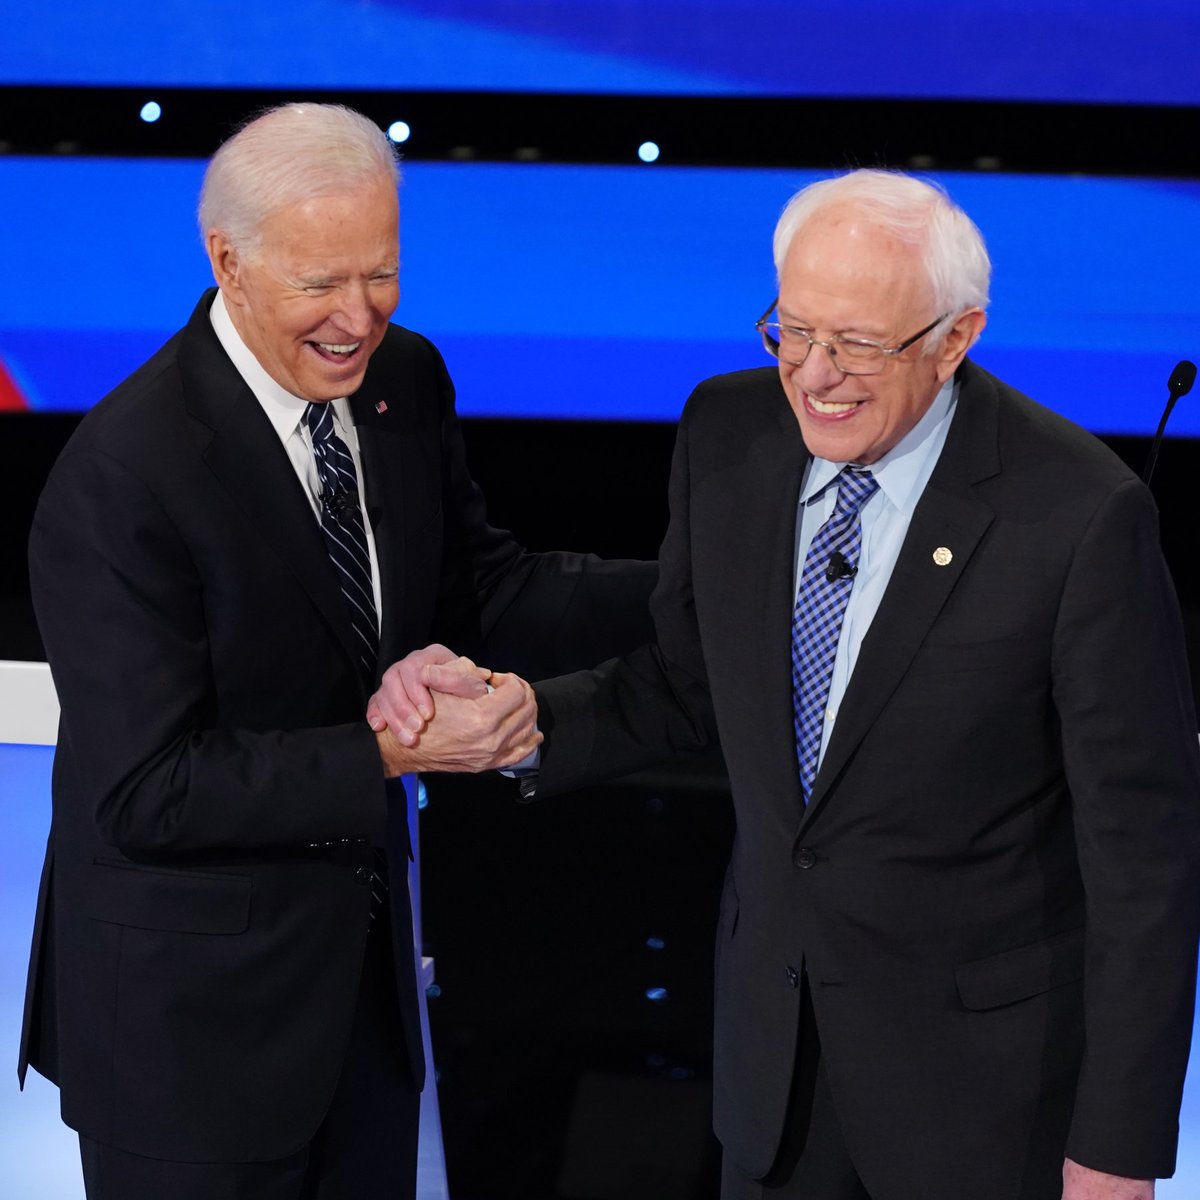 🚨 GIVE BERNIE HIS DUE Today on CNN's State of the Union, Bernie Sanders came to President Biden's defense and hit Cornell West over his criticism of the president: Sanders: '𝘞𝘩𝘦𝘳𝘦 𝘐 𝘥𝘪𝘴𝘢𝘨𝘳𝘦𝘦 𝘸𝘪𝘵𝘩 𝘮𝘺 𝘨𝘰𝘰𝘥 𝘧𝘳𝘪𝘦𝘯𝘥 𝘊𝘰𝘳𝘯𝘦𝘭 𝘞𝘦𝘴𝘵 𝘪𝘴 𝘐